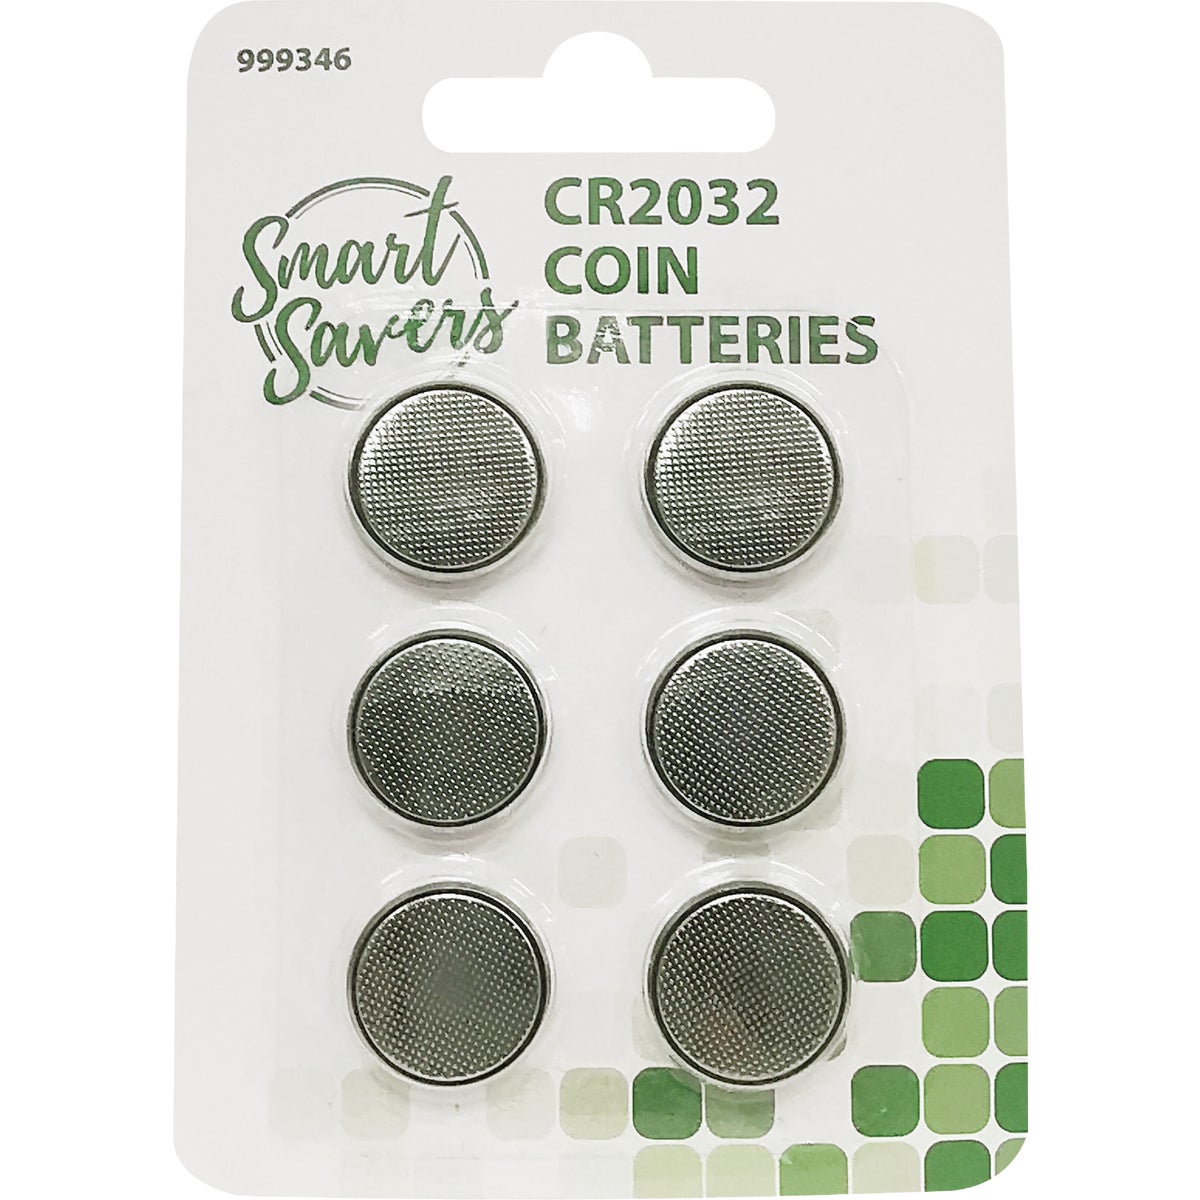 Smart Savers CR2032 Lithium Ion Coin Button Cell Battery (6-Pack)